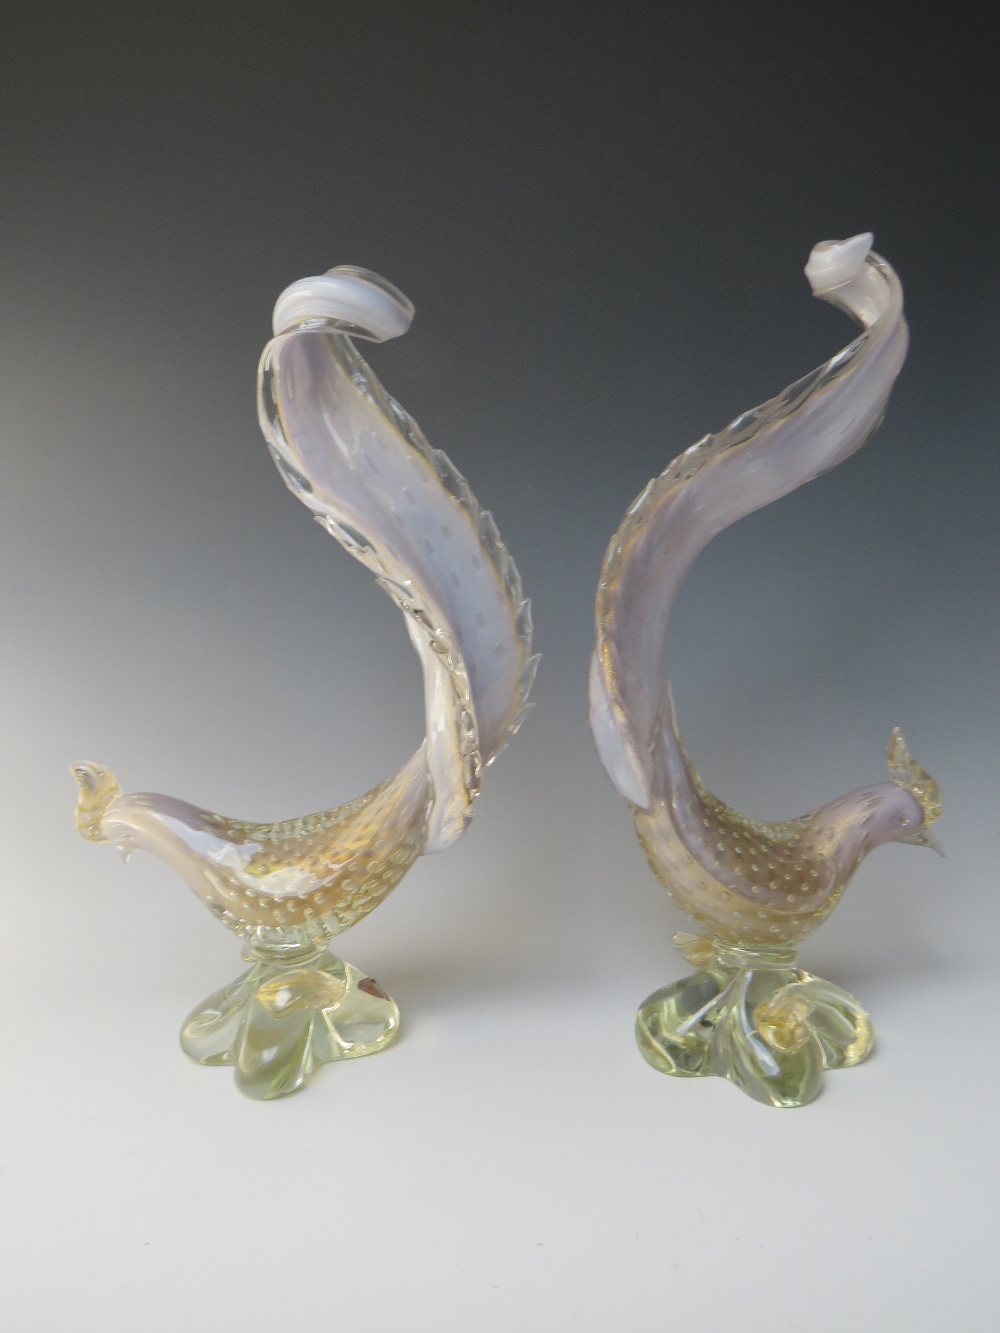 A PAIR OF MURANO BIRD OF PARADISE GLASS SCULPTURES, circa 1950, lilac and clear glass body with gold - Image 5 of 6